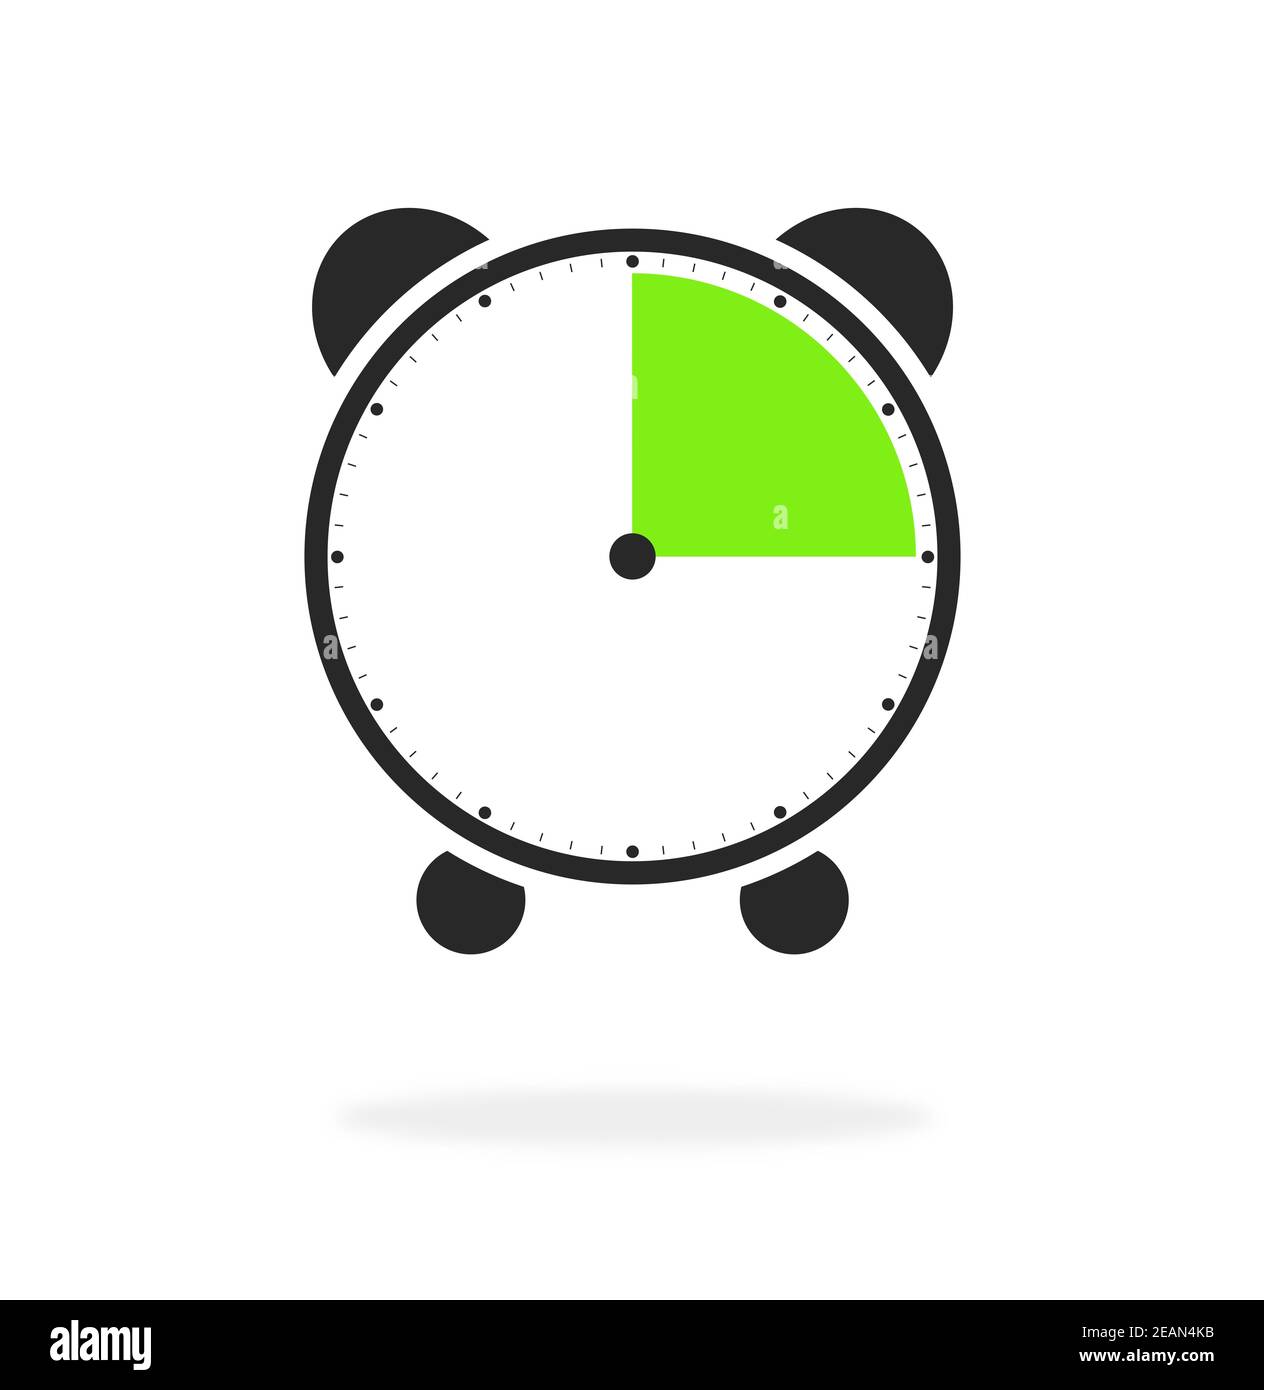 15 Seconds, 15 Minutes or 3 Hours - Alarm clock icon green and black Stock  Photo - Alamy